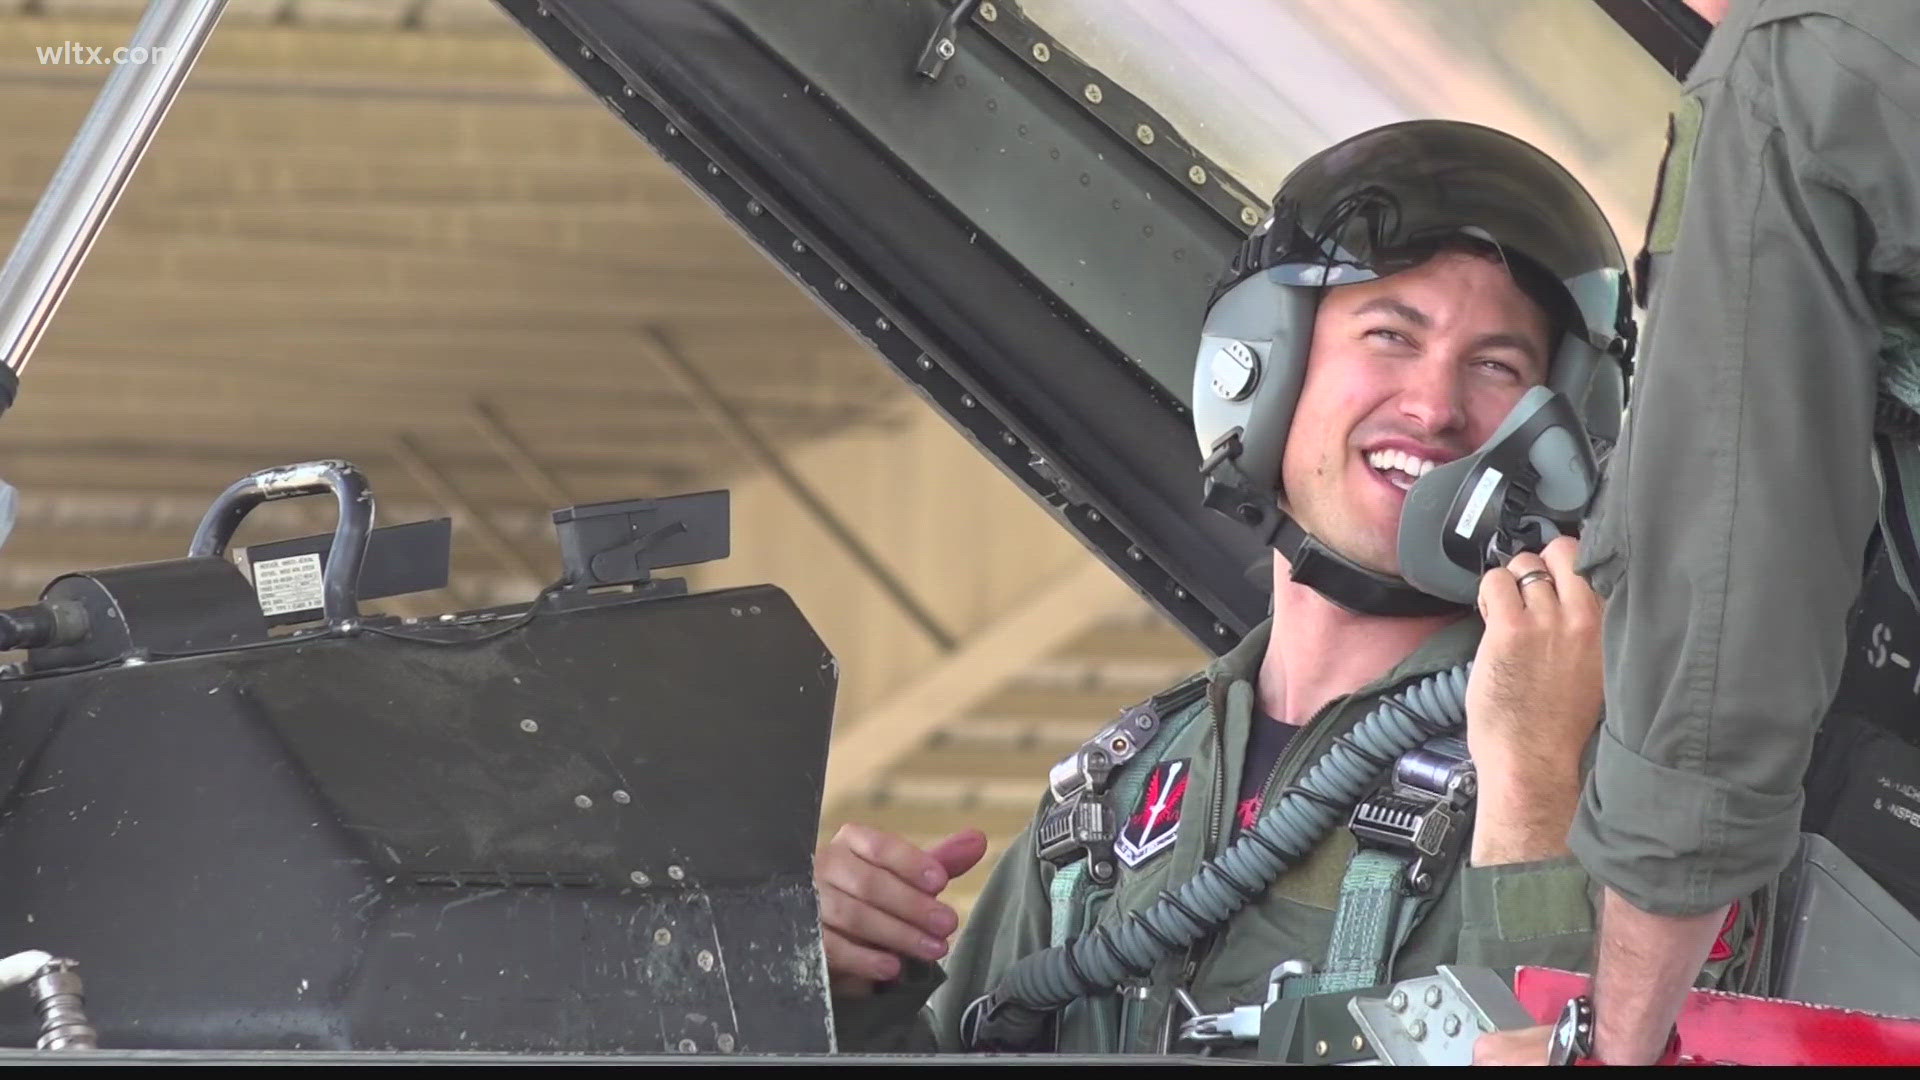 NASCAR superstar Joey Lagano flys on a racetrack but on Tuesday at Shaw AFB he got to fly in one of their fighter jets.